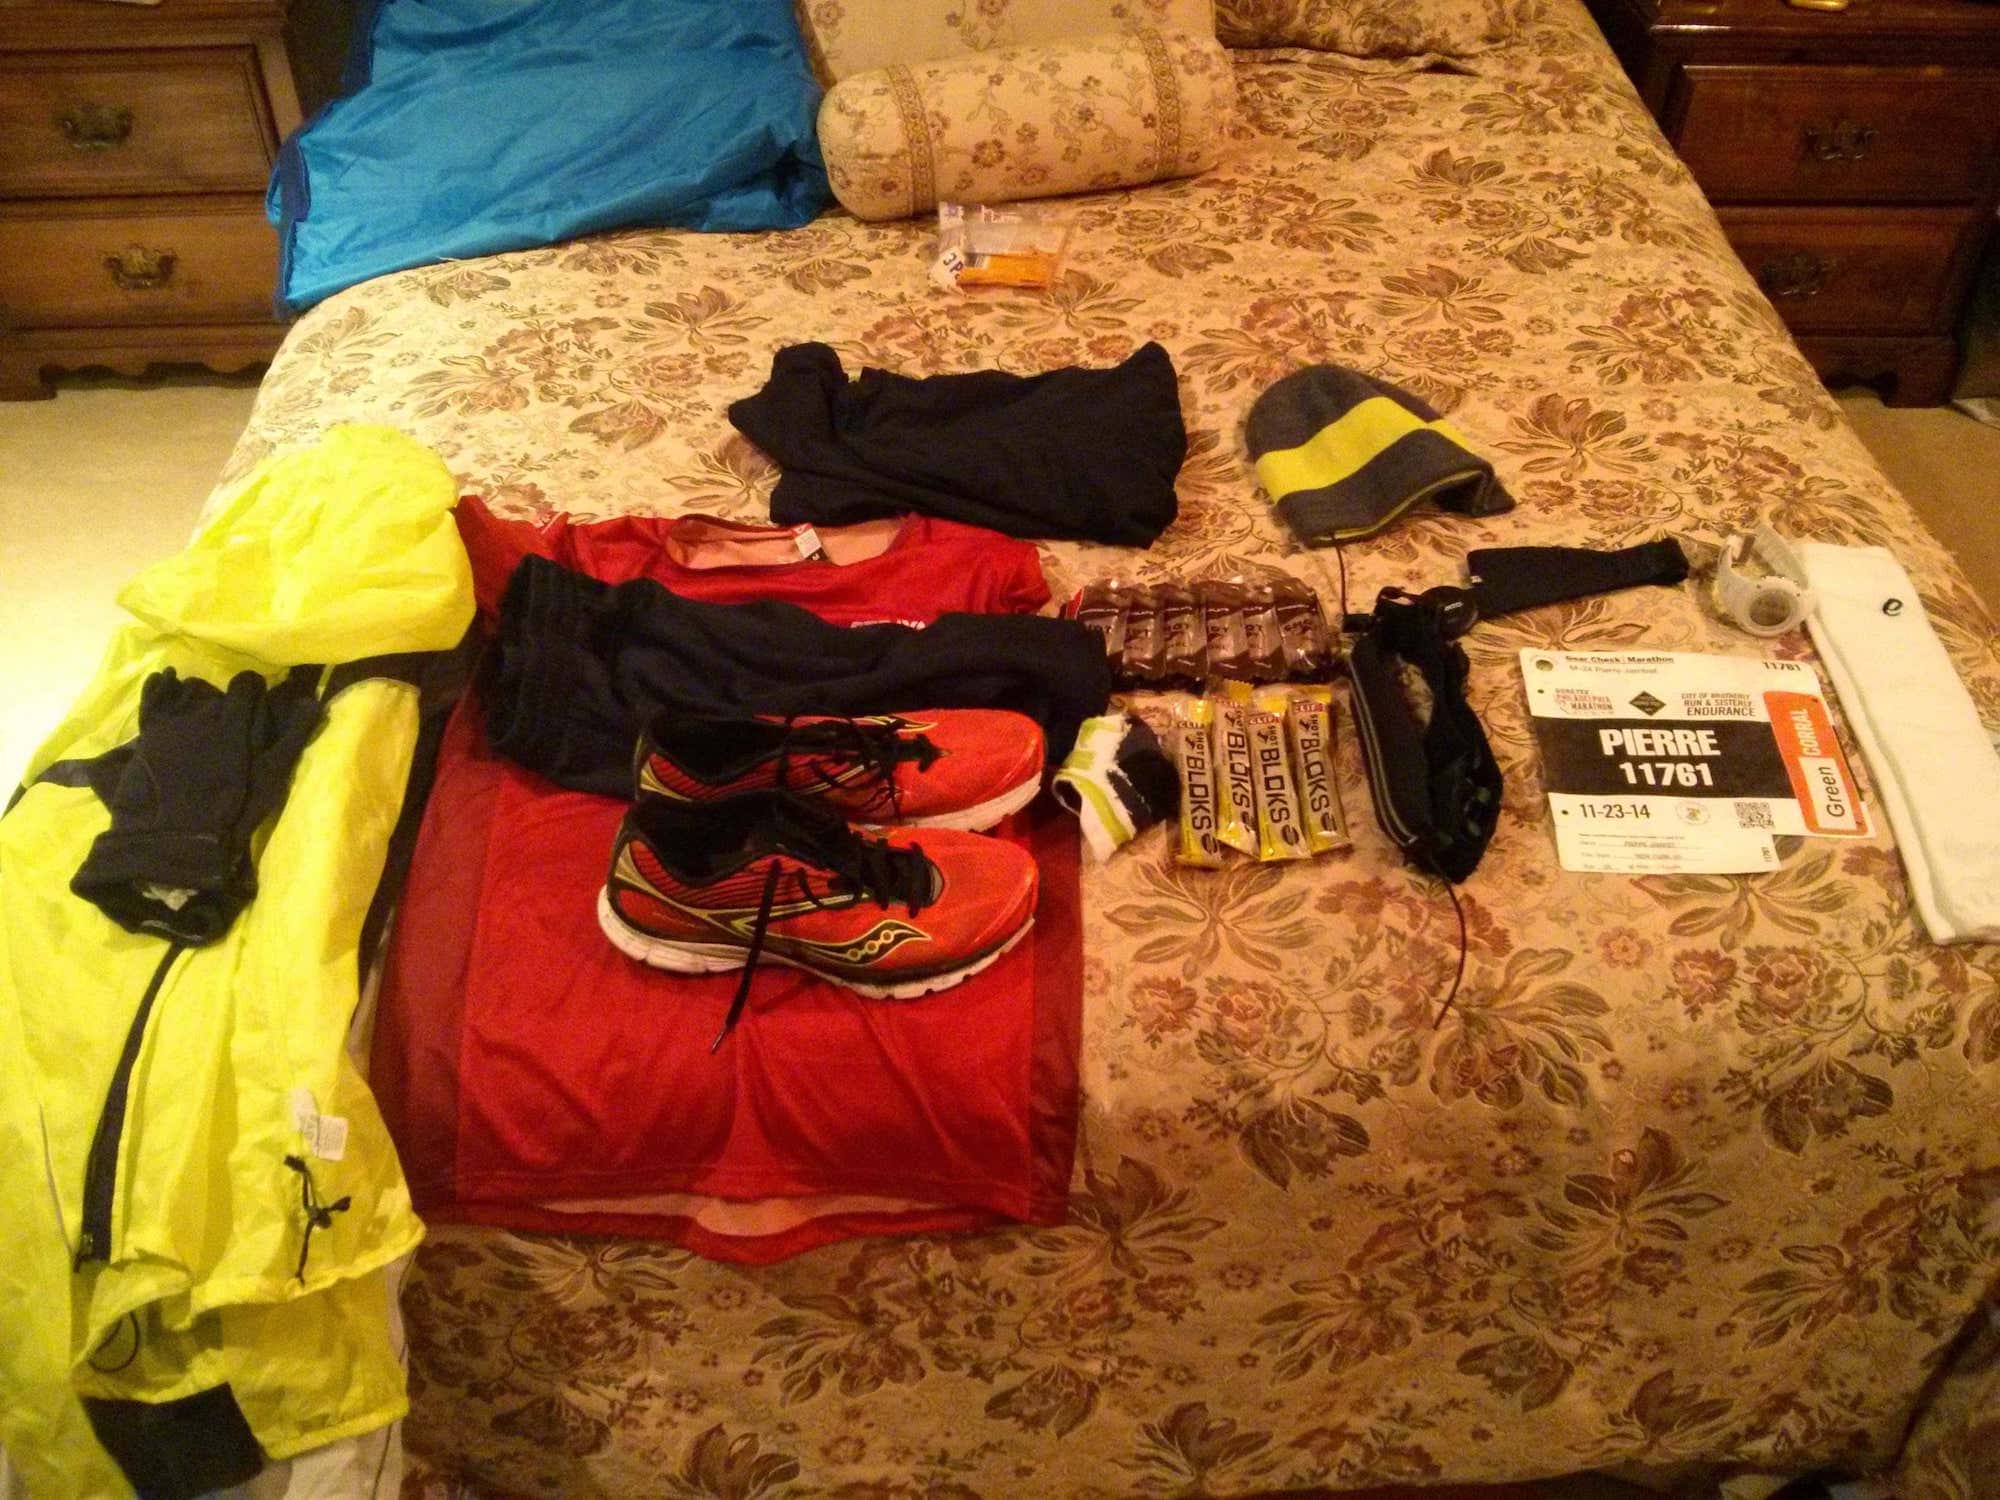 Picture of my shoes and gel before the Philadelphia Marathon